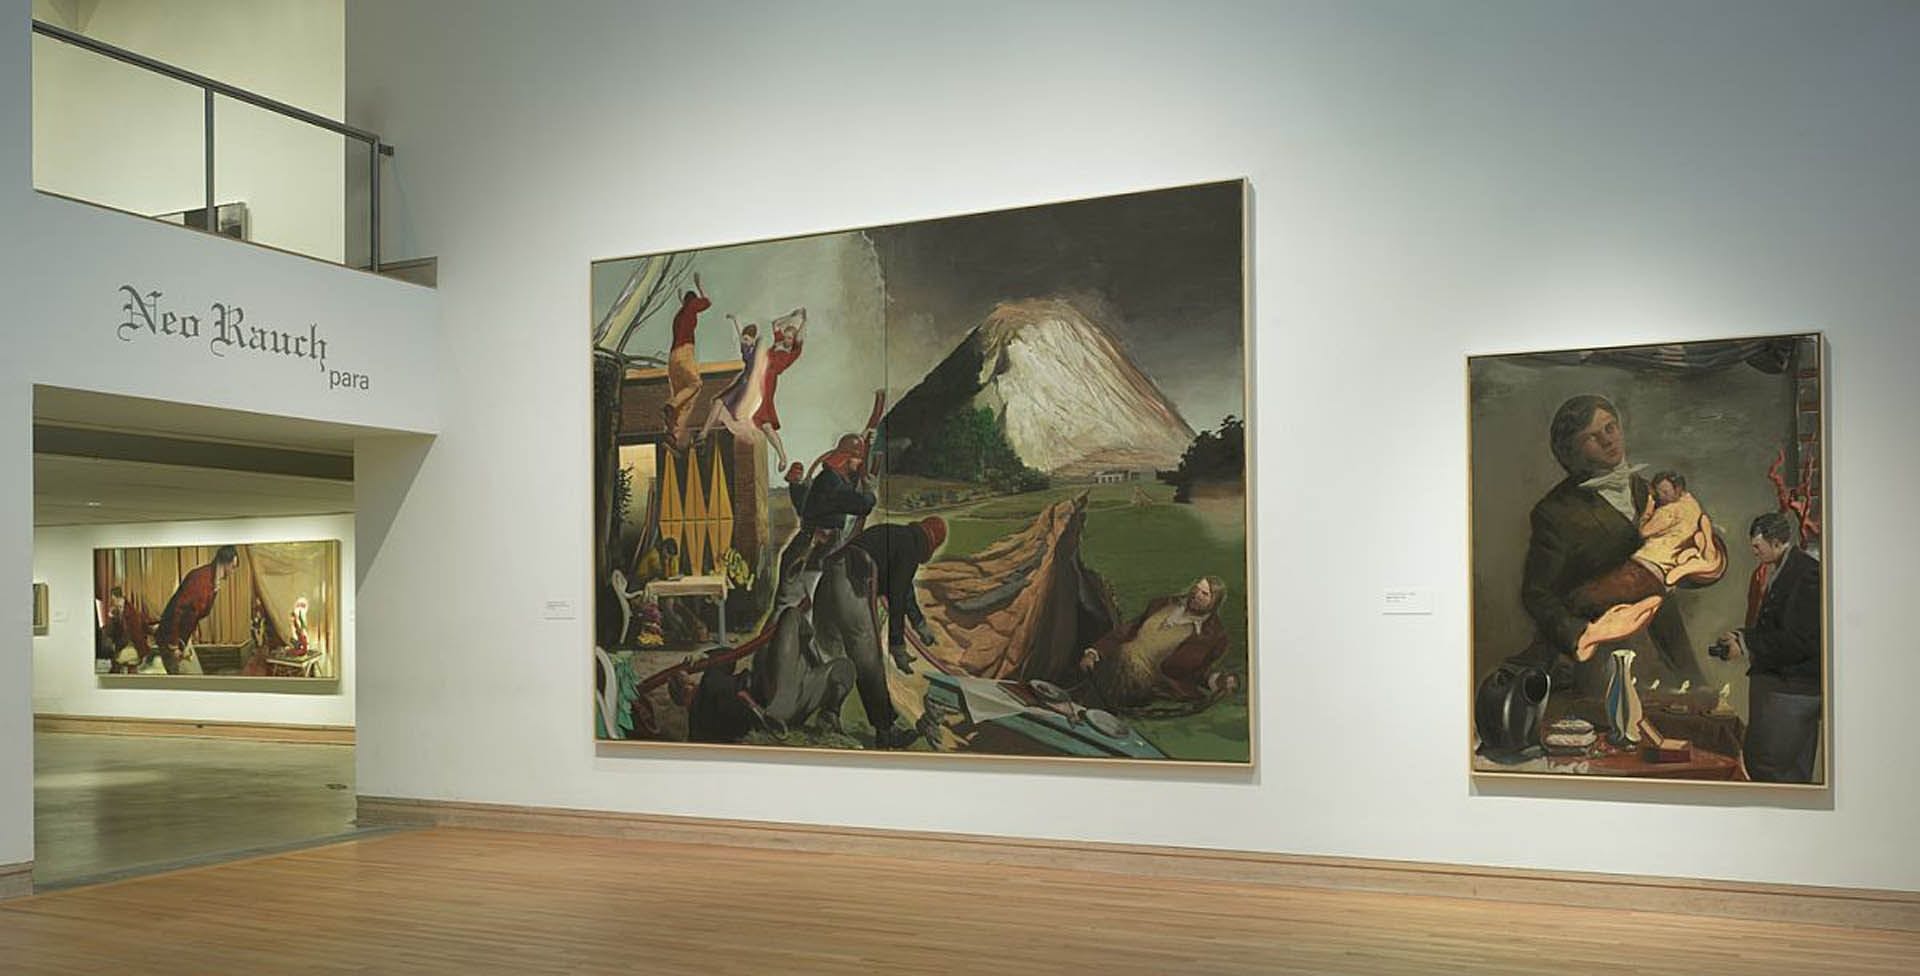 Installation view of the exhibition titled para at the Metropolitan Museum of Art, New York, dated 2007.